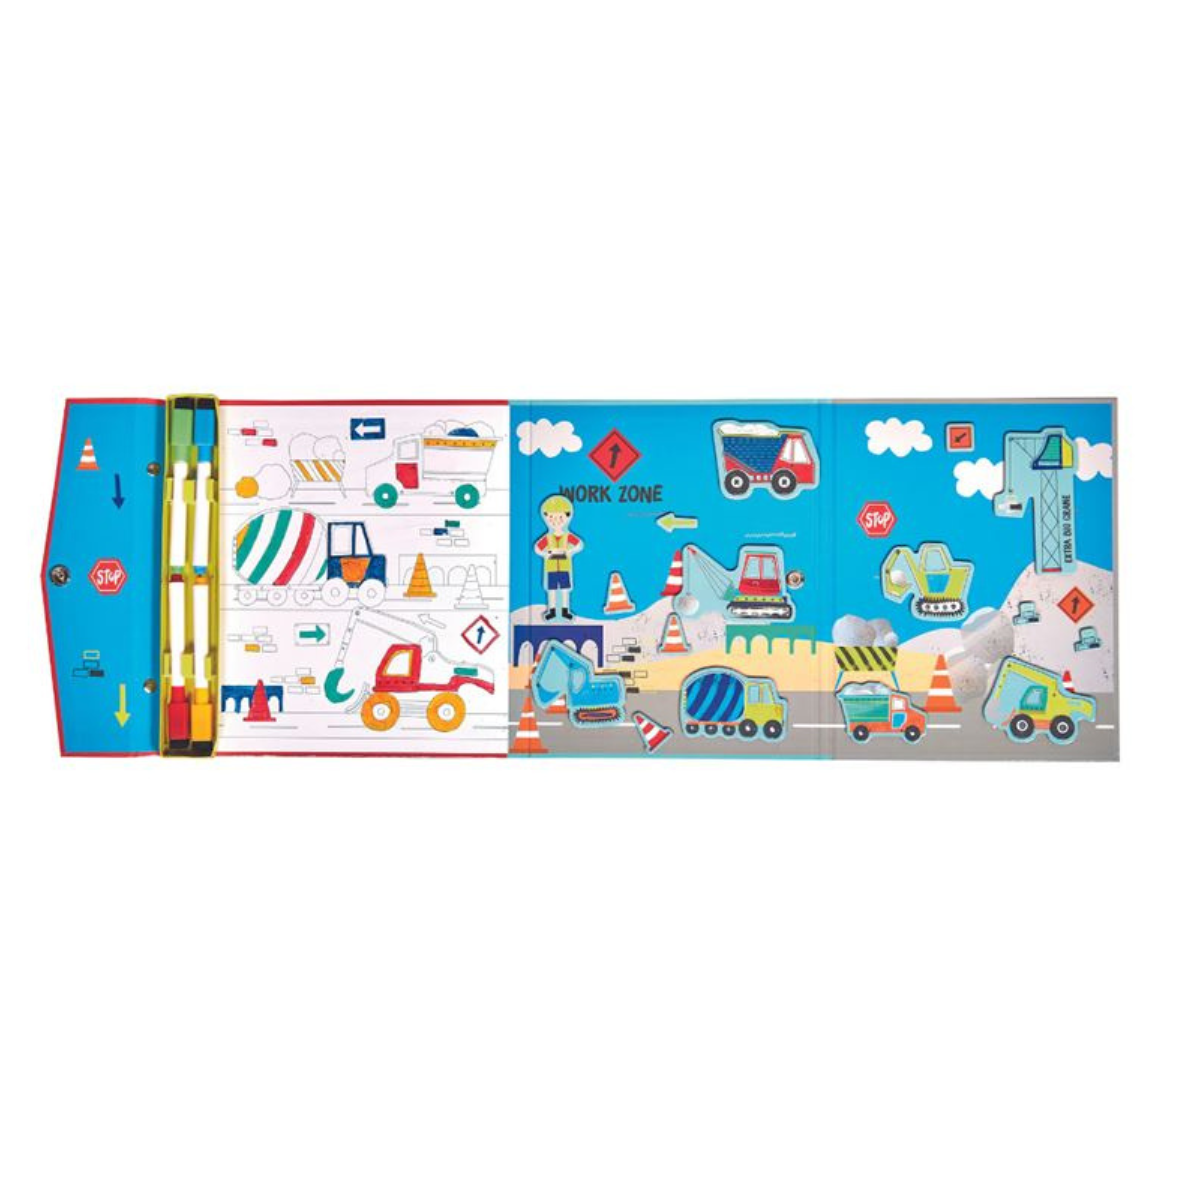 Magnetic Multi Play